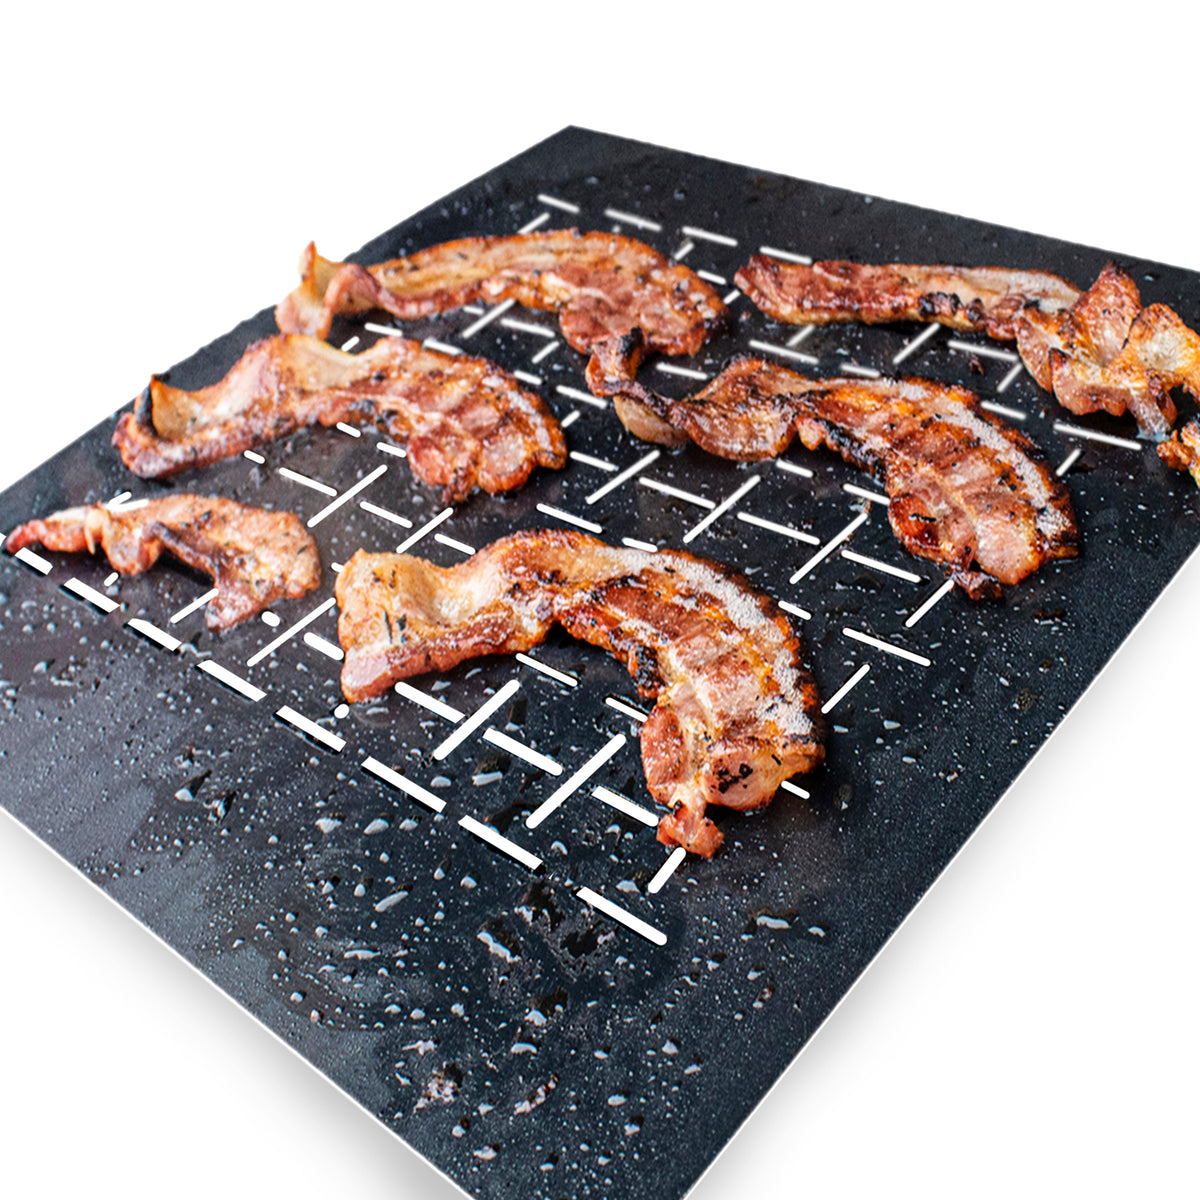 KONA Best BBQ Grill Mats with Holes - Heavy Duty 600 Degree Non-Stick